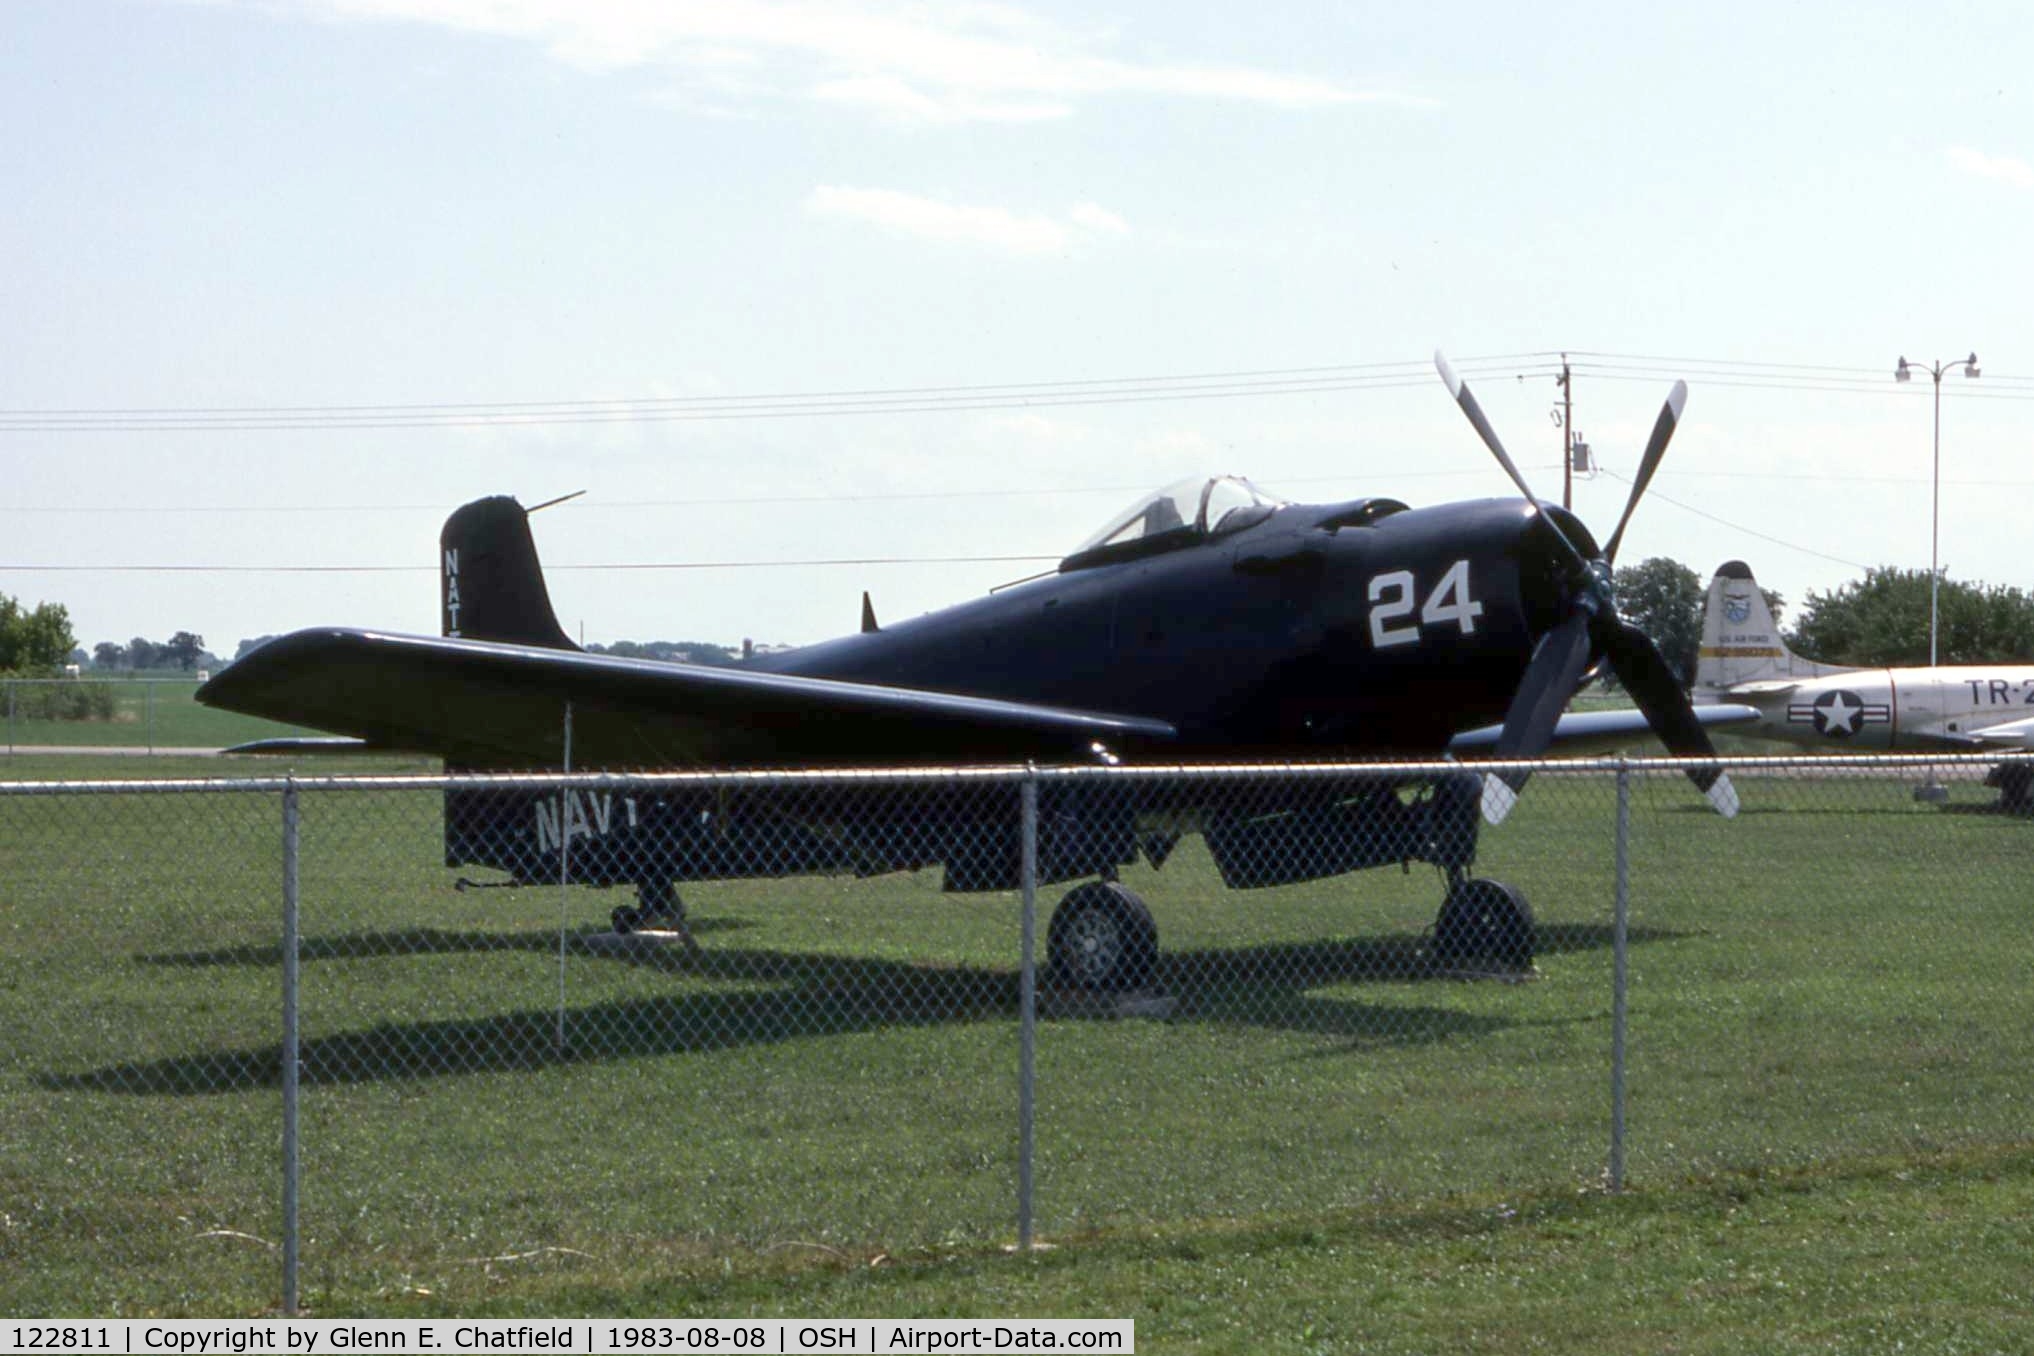 122811, Douglas A-1E Skyraider C/N 6933, AD-3 at the EAA Museum.  It is now on display at the Naval Support Activity in Philadelphia